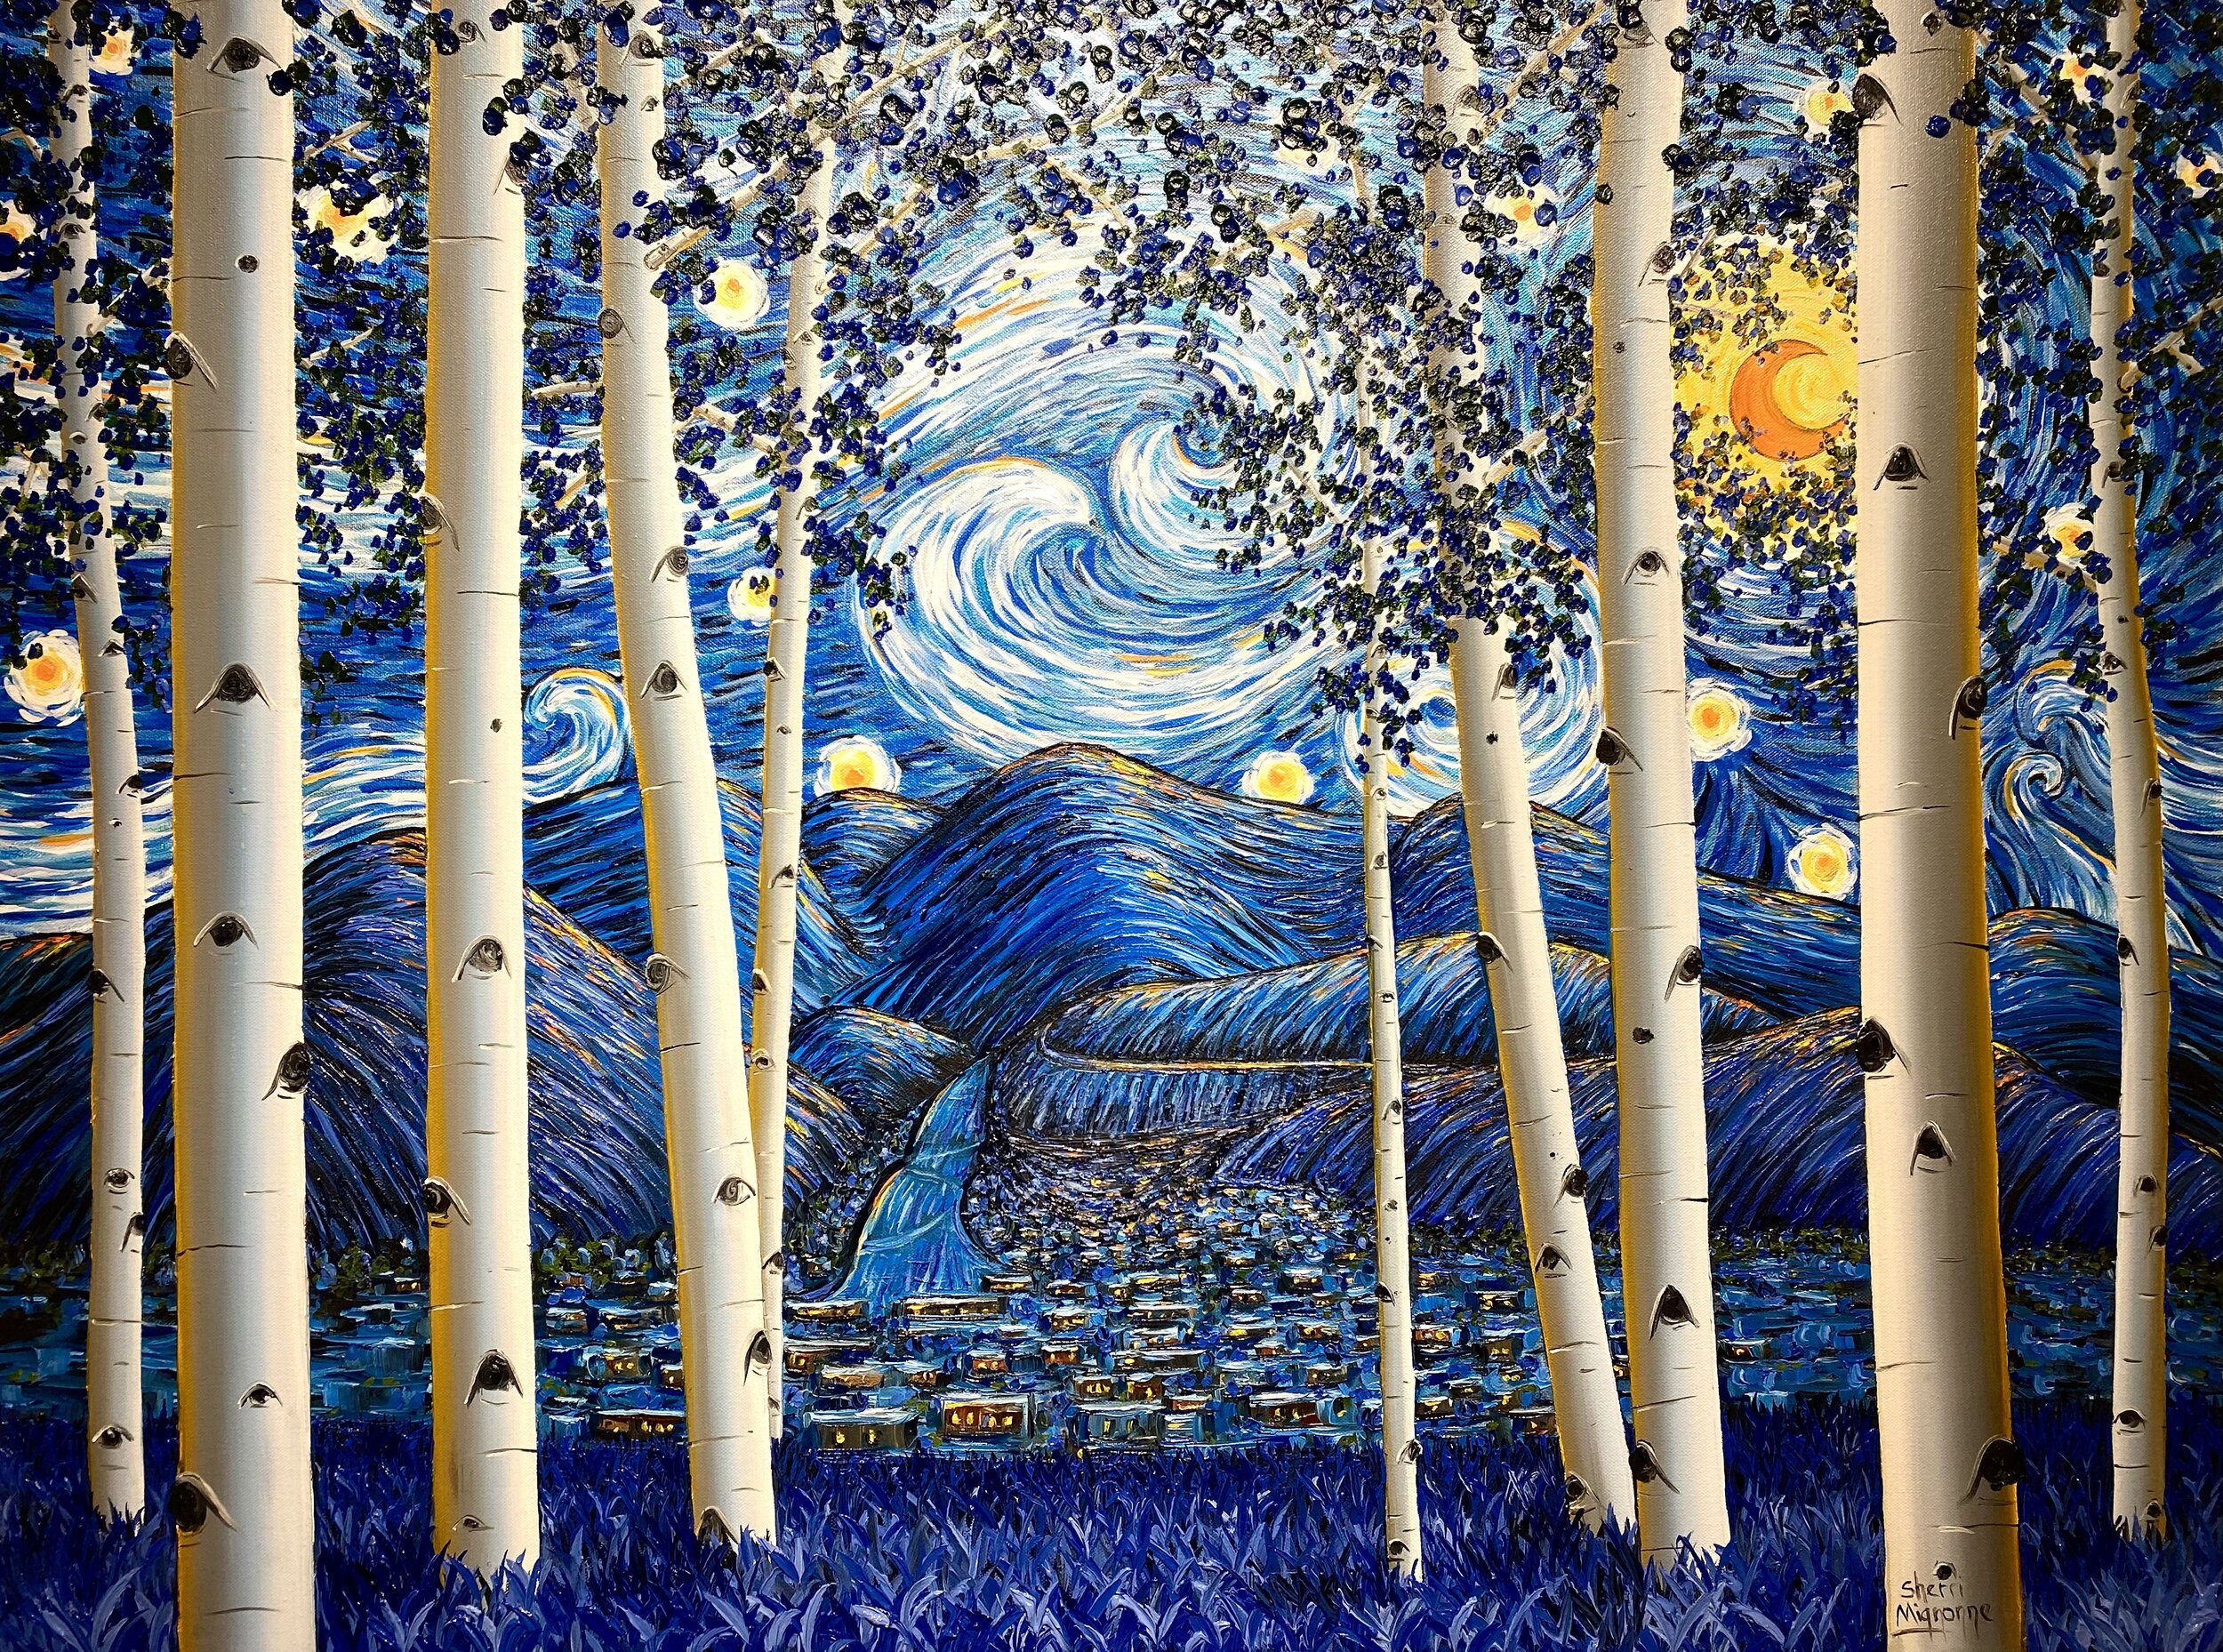 The Starry Night Series “Magnificence” 30x40